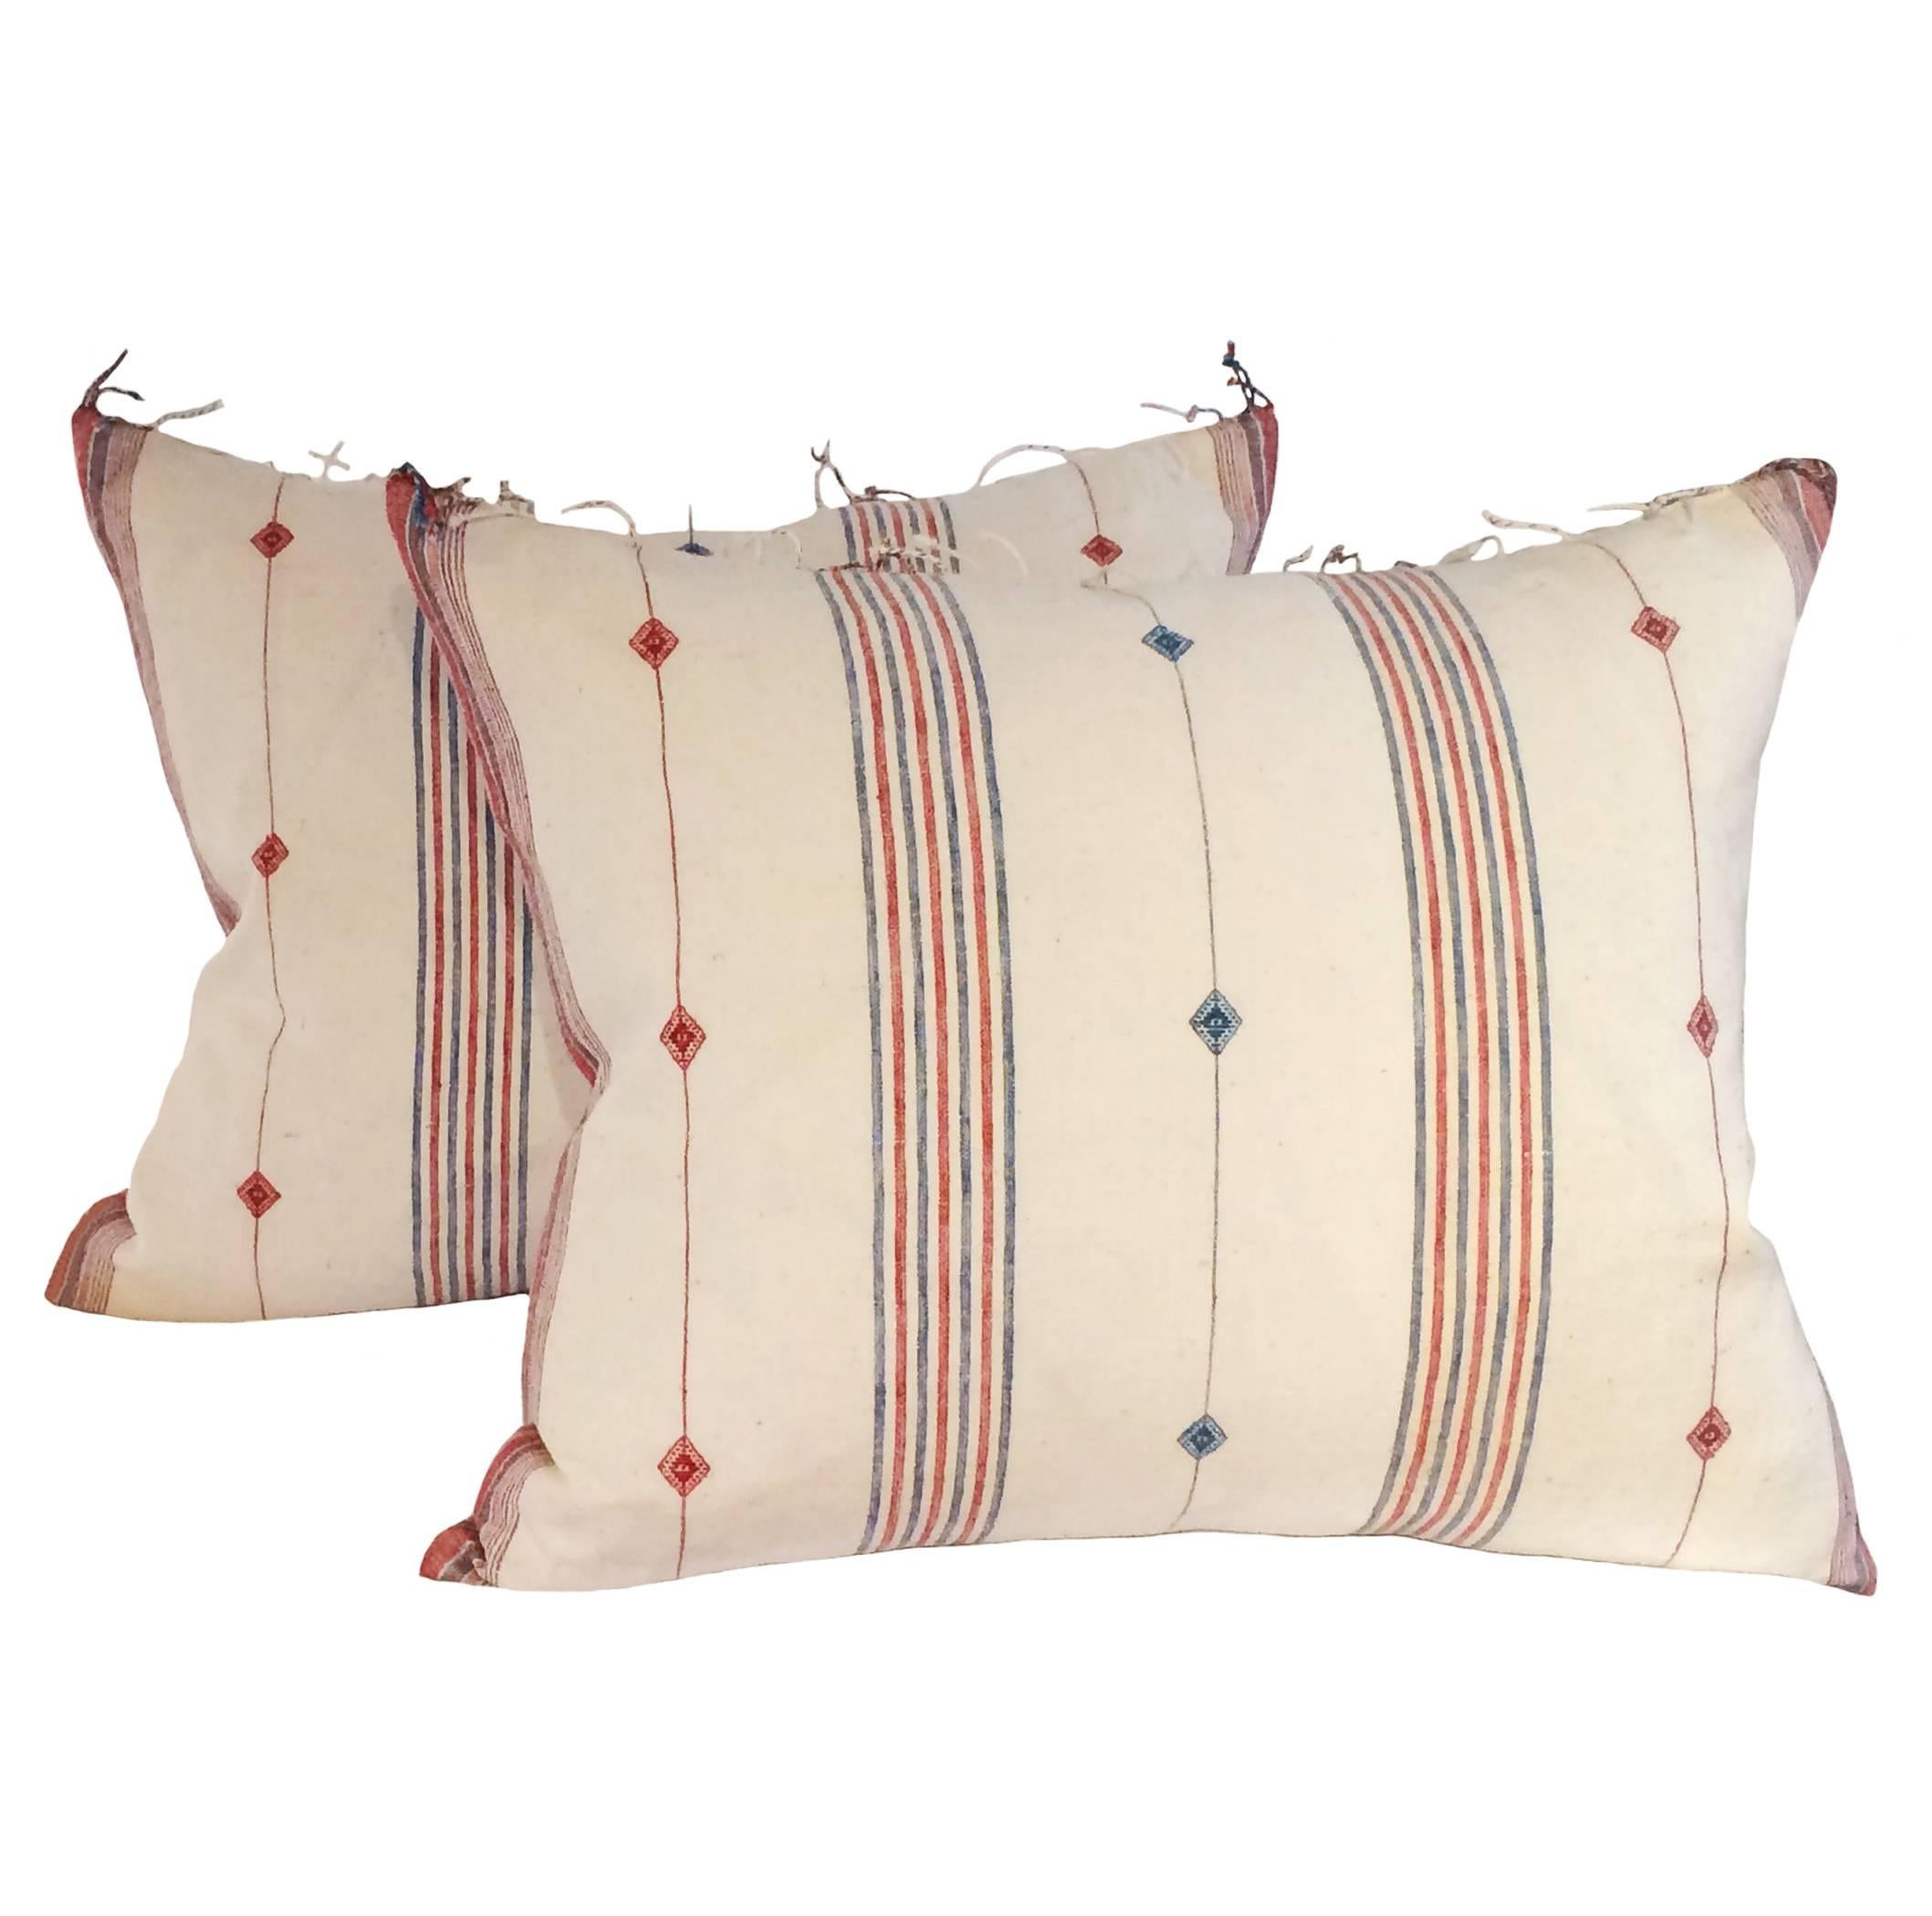 Pair of custom red, blue and ivory striped cotton down pillows with fringe, India, Mid-Century. Made from vintage scarves; reinforced with backing. Vintage fabric on both sides.